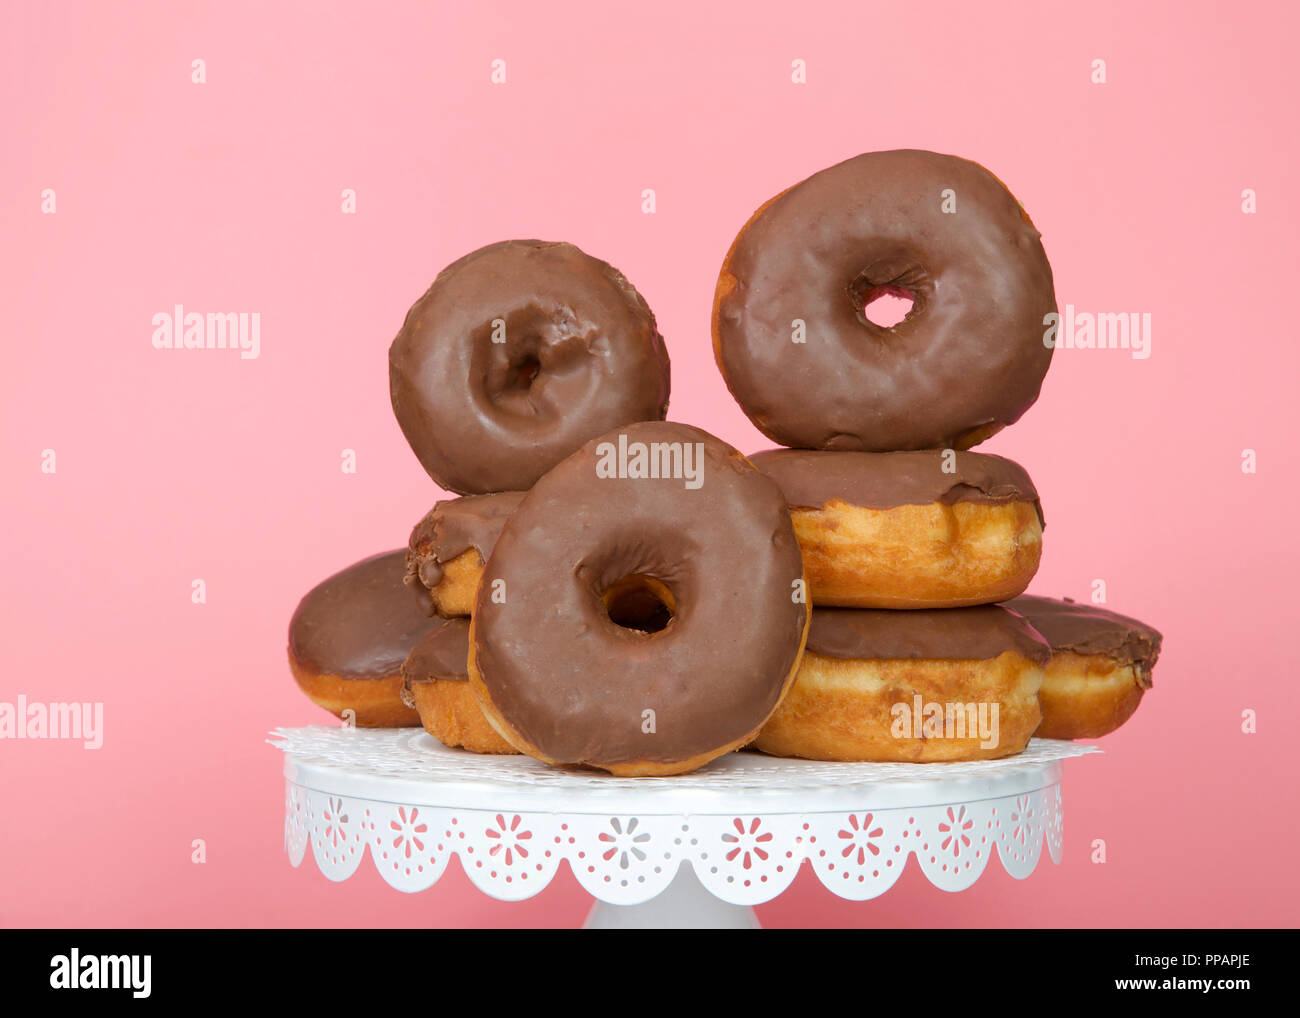 Many cake donuts frosted in chocolate stacked on a latticed white pedestal on a pink background with copy space Stock Photo